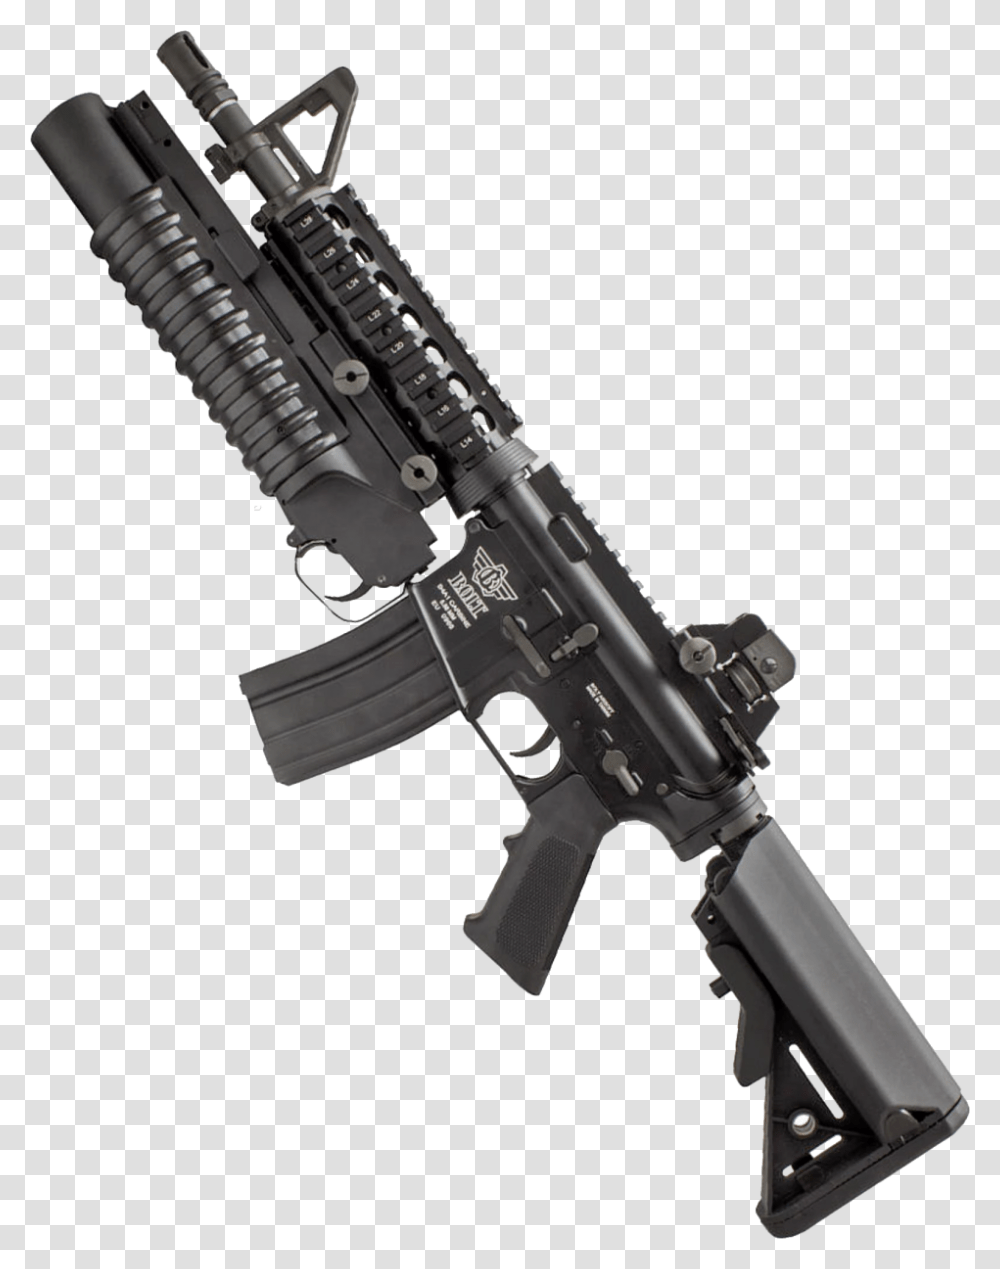 Grenade Launcher Image, Gun, Weapon, Weaponry, Rifle Transparent Png